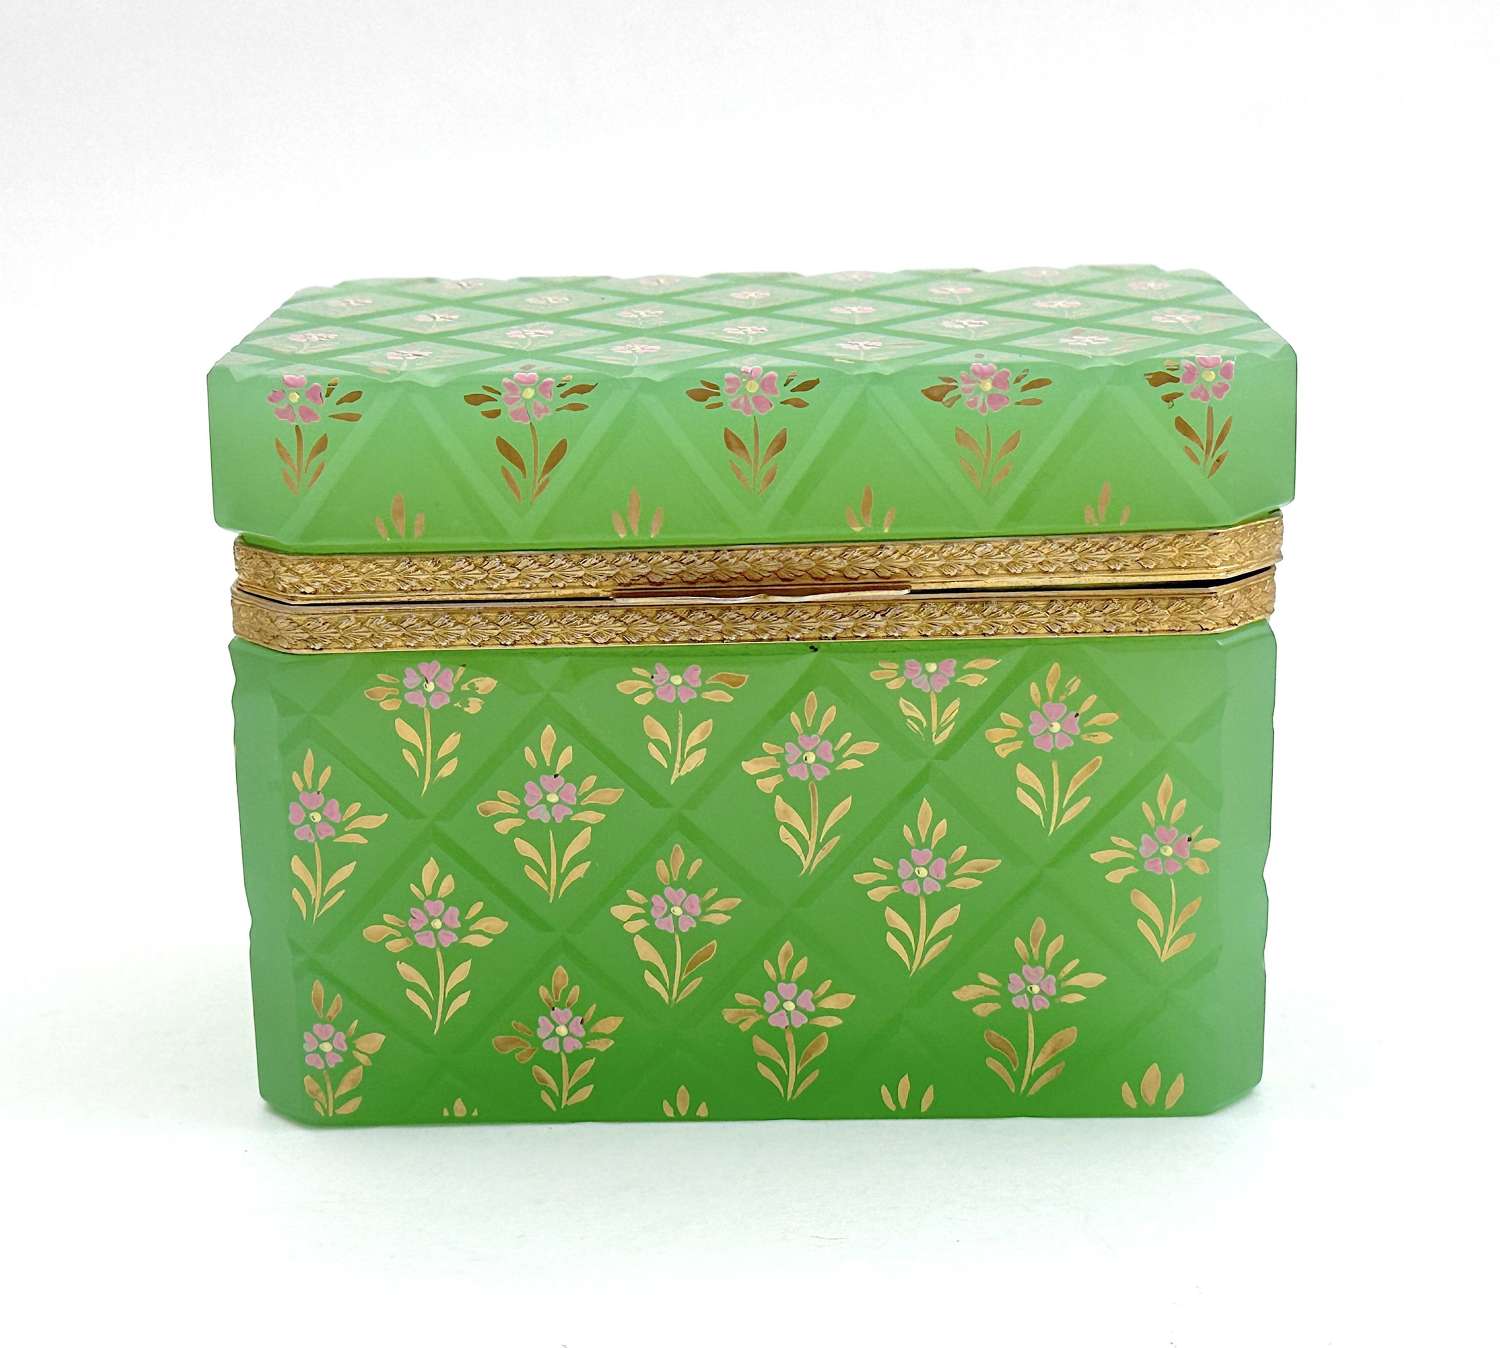 Superb Antique French Green Opaline Glass Box Decorated with Flowers